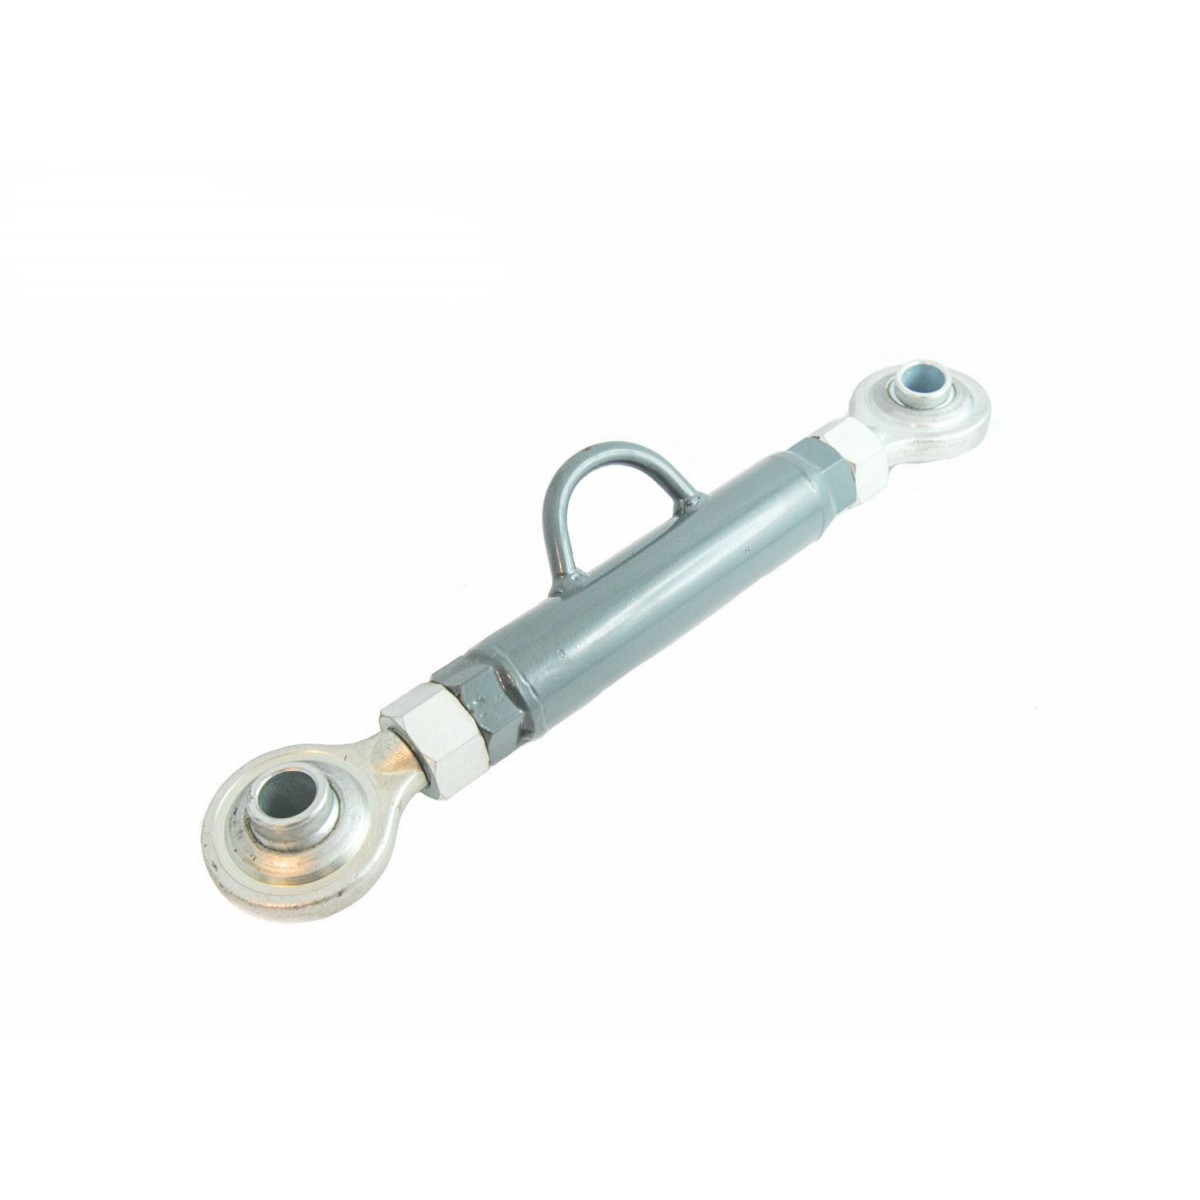 6-02-101-03  Top Link Fits For Kubota